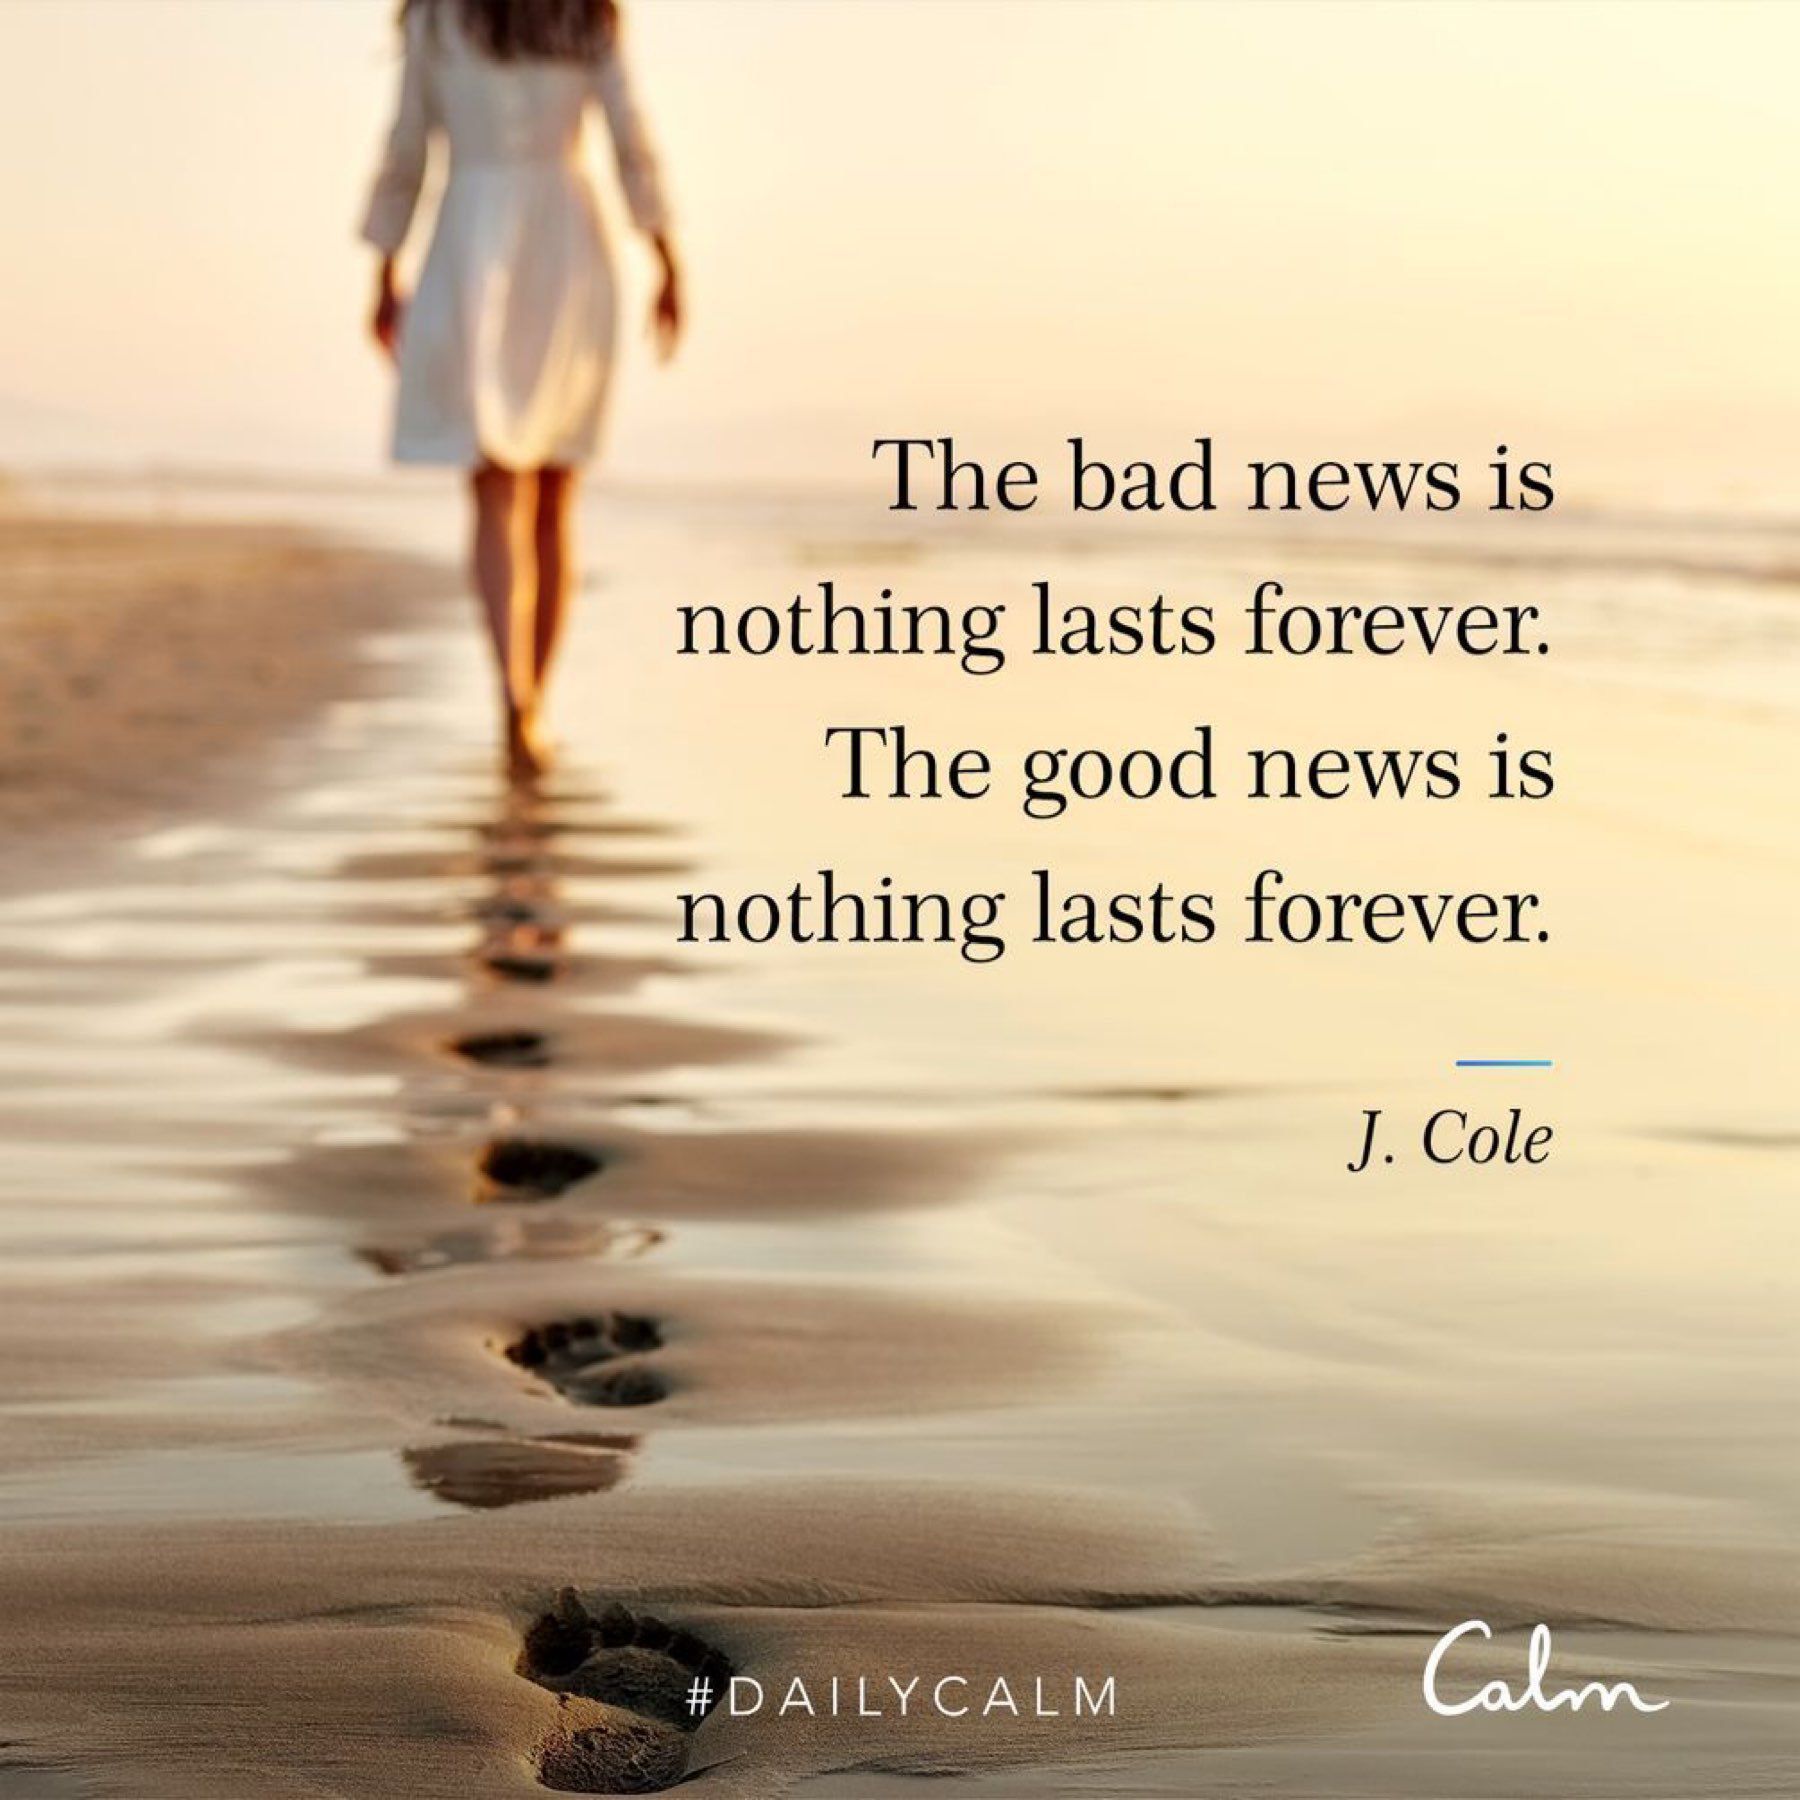 The bad news is nothing lasts forever. The good news is nothing lasts forever.